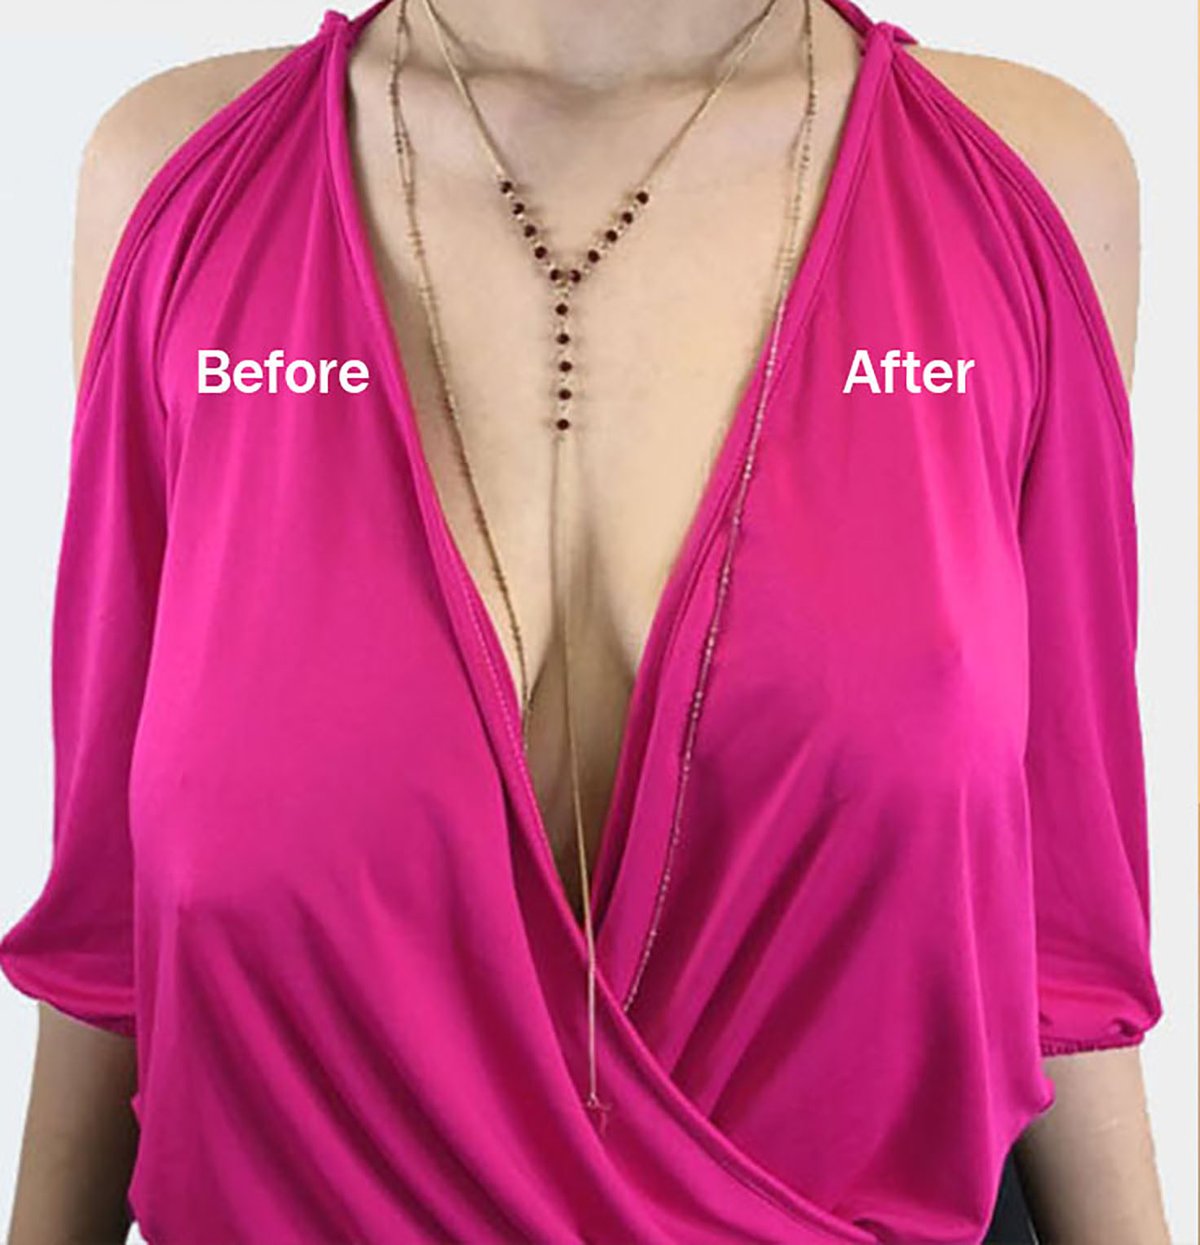  Bring It Up Instant Breast Lift-Boob Tape/Sticky Bra - Cup Sizes  A-D, 8 Pairs - Works Great with Backless Bra or Strapless Bra/Waterproof  BoobTape : Clothing, Shoes & Jewelry